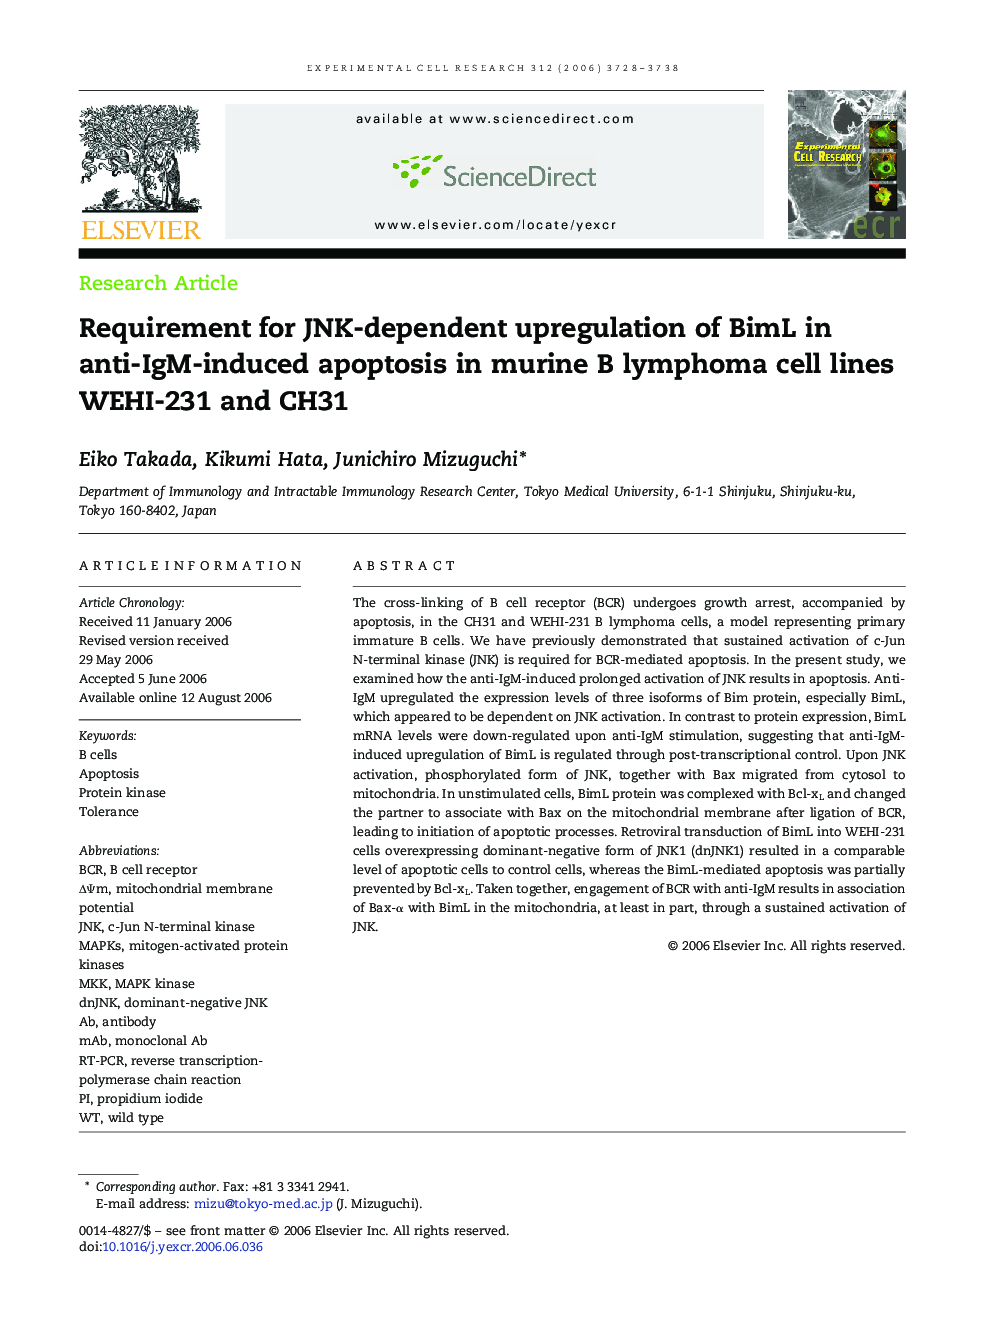 Requirement for JNK-dependent upregulation of BimL in anti-IgM-induced apoptosis in murine B lymphoma cell lines WEHI-231 and CH31